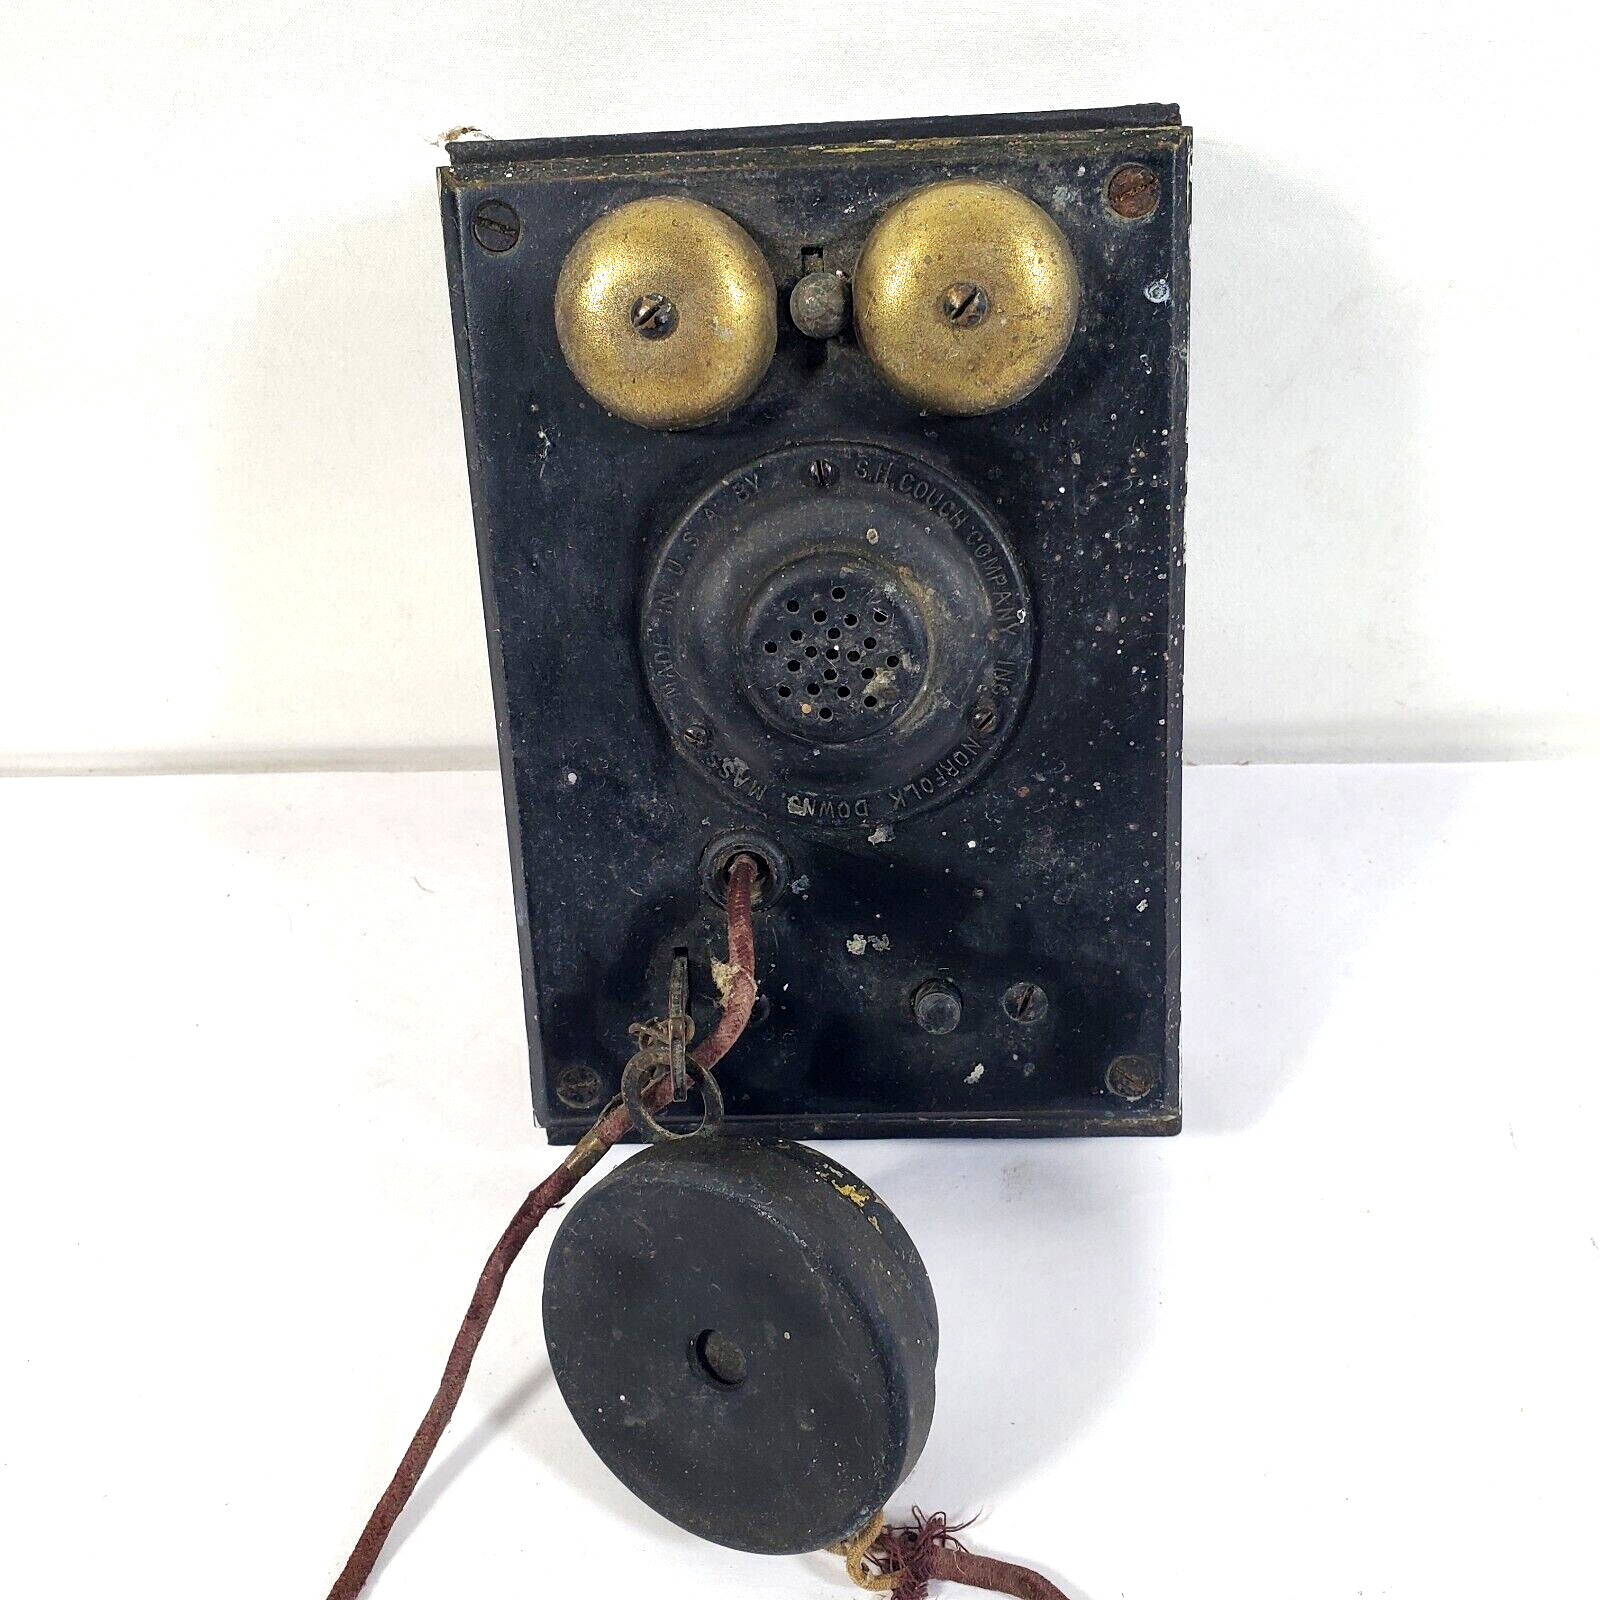 Antique S. H. Couch Wall Intercom Telephone Vintage WWII Era Sold As